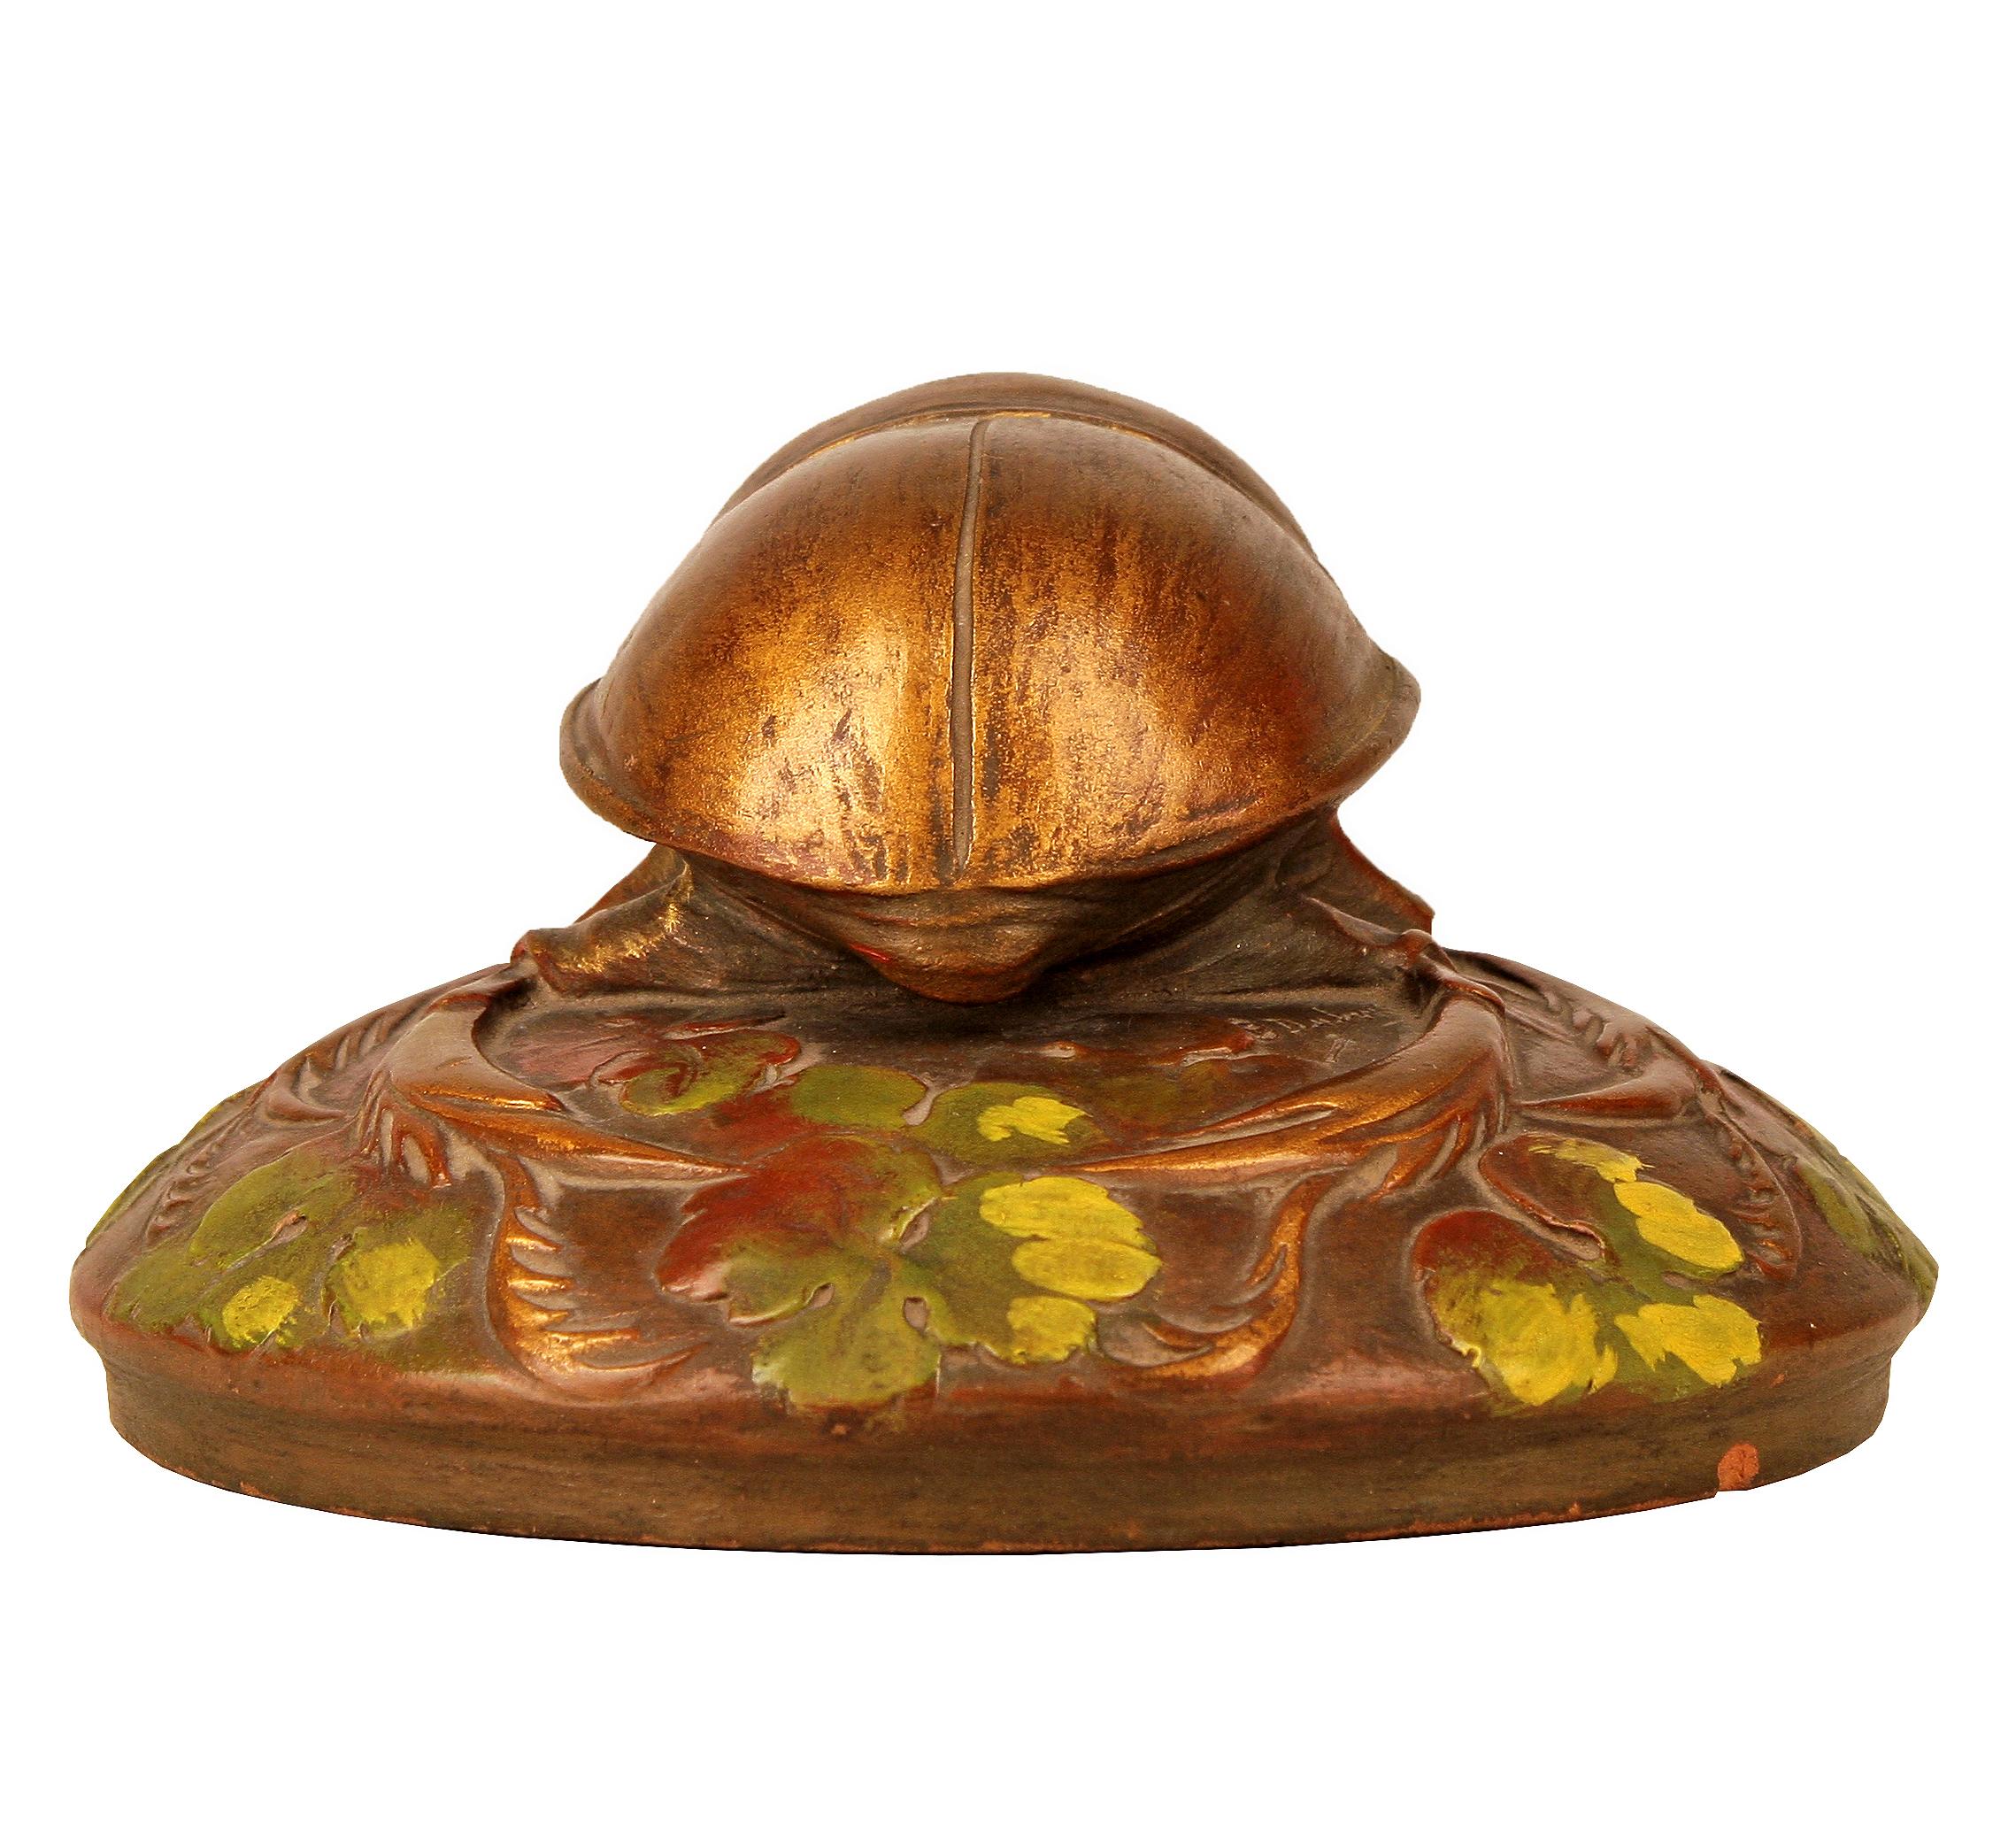 Belle Époque Early 20th Century French Cold-Painted Ceramic Beetle Sculpture by Ernest Dubois For Sale